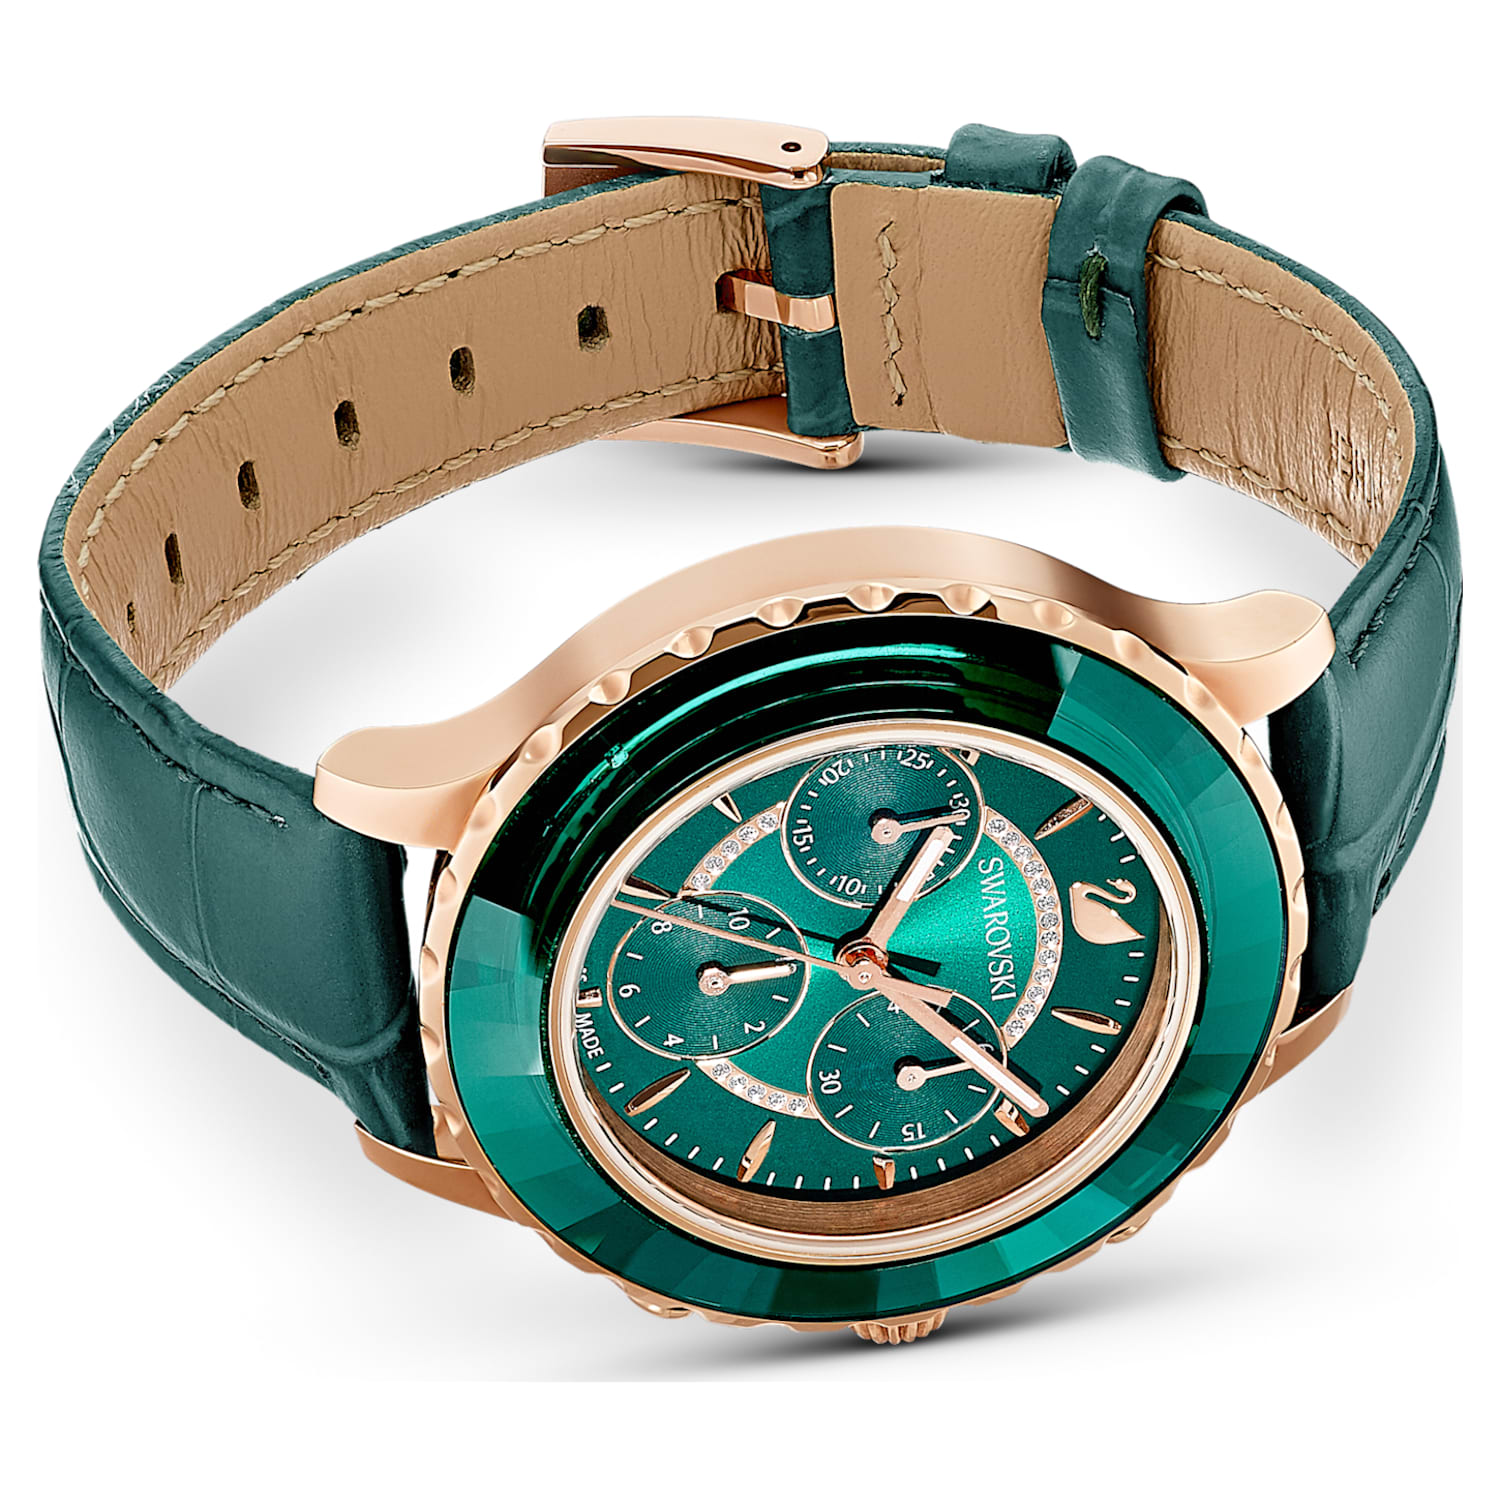 Octea Lux Chrono watch, Leather strap, Green, Rose gold-tone finish